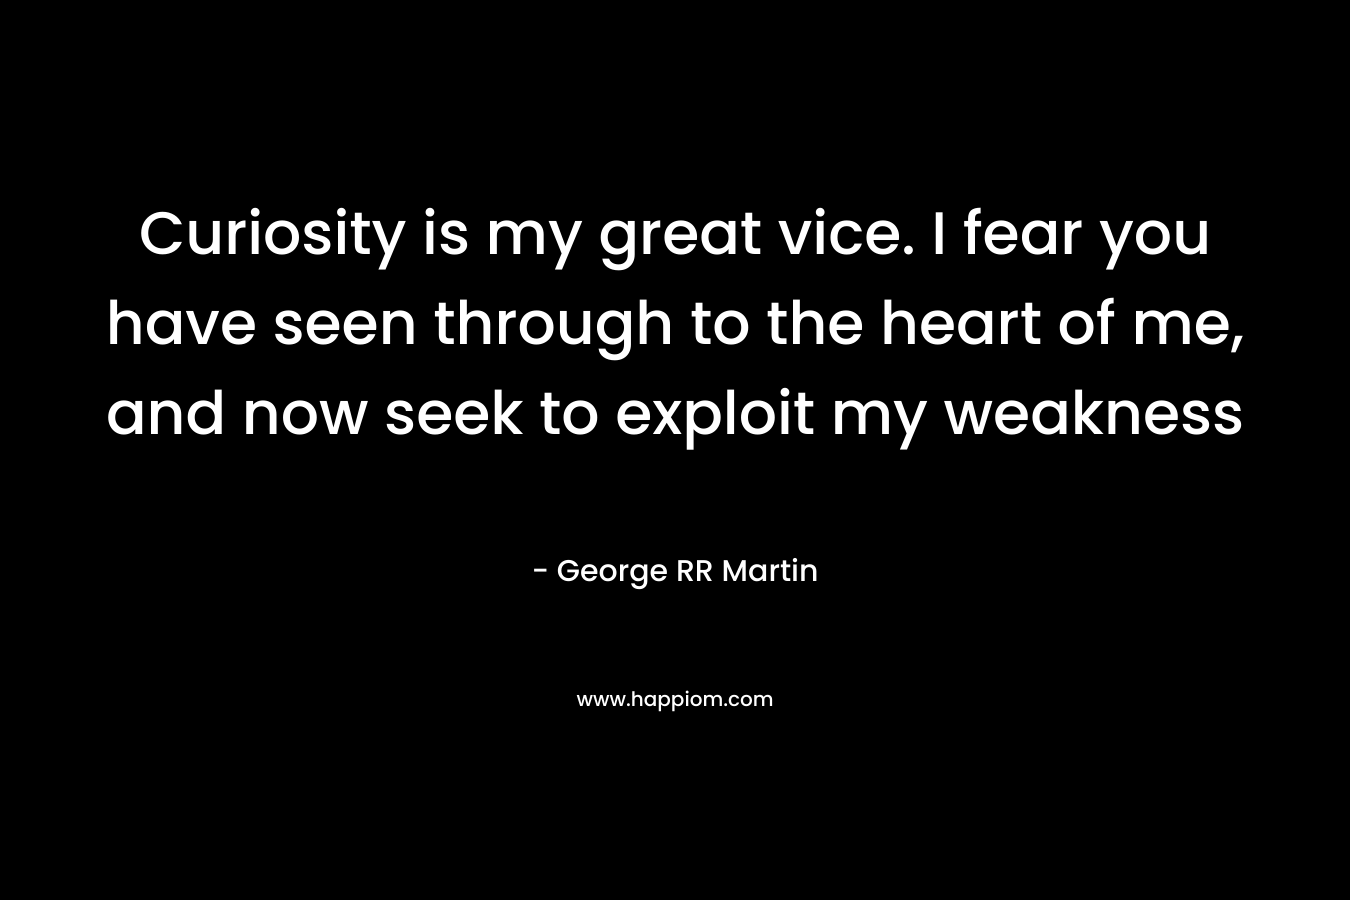 Curiosity is my great vice. I fear you have seen through to the heart of me, and now seek to exploit my weakness – George RR Martin